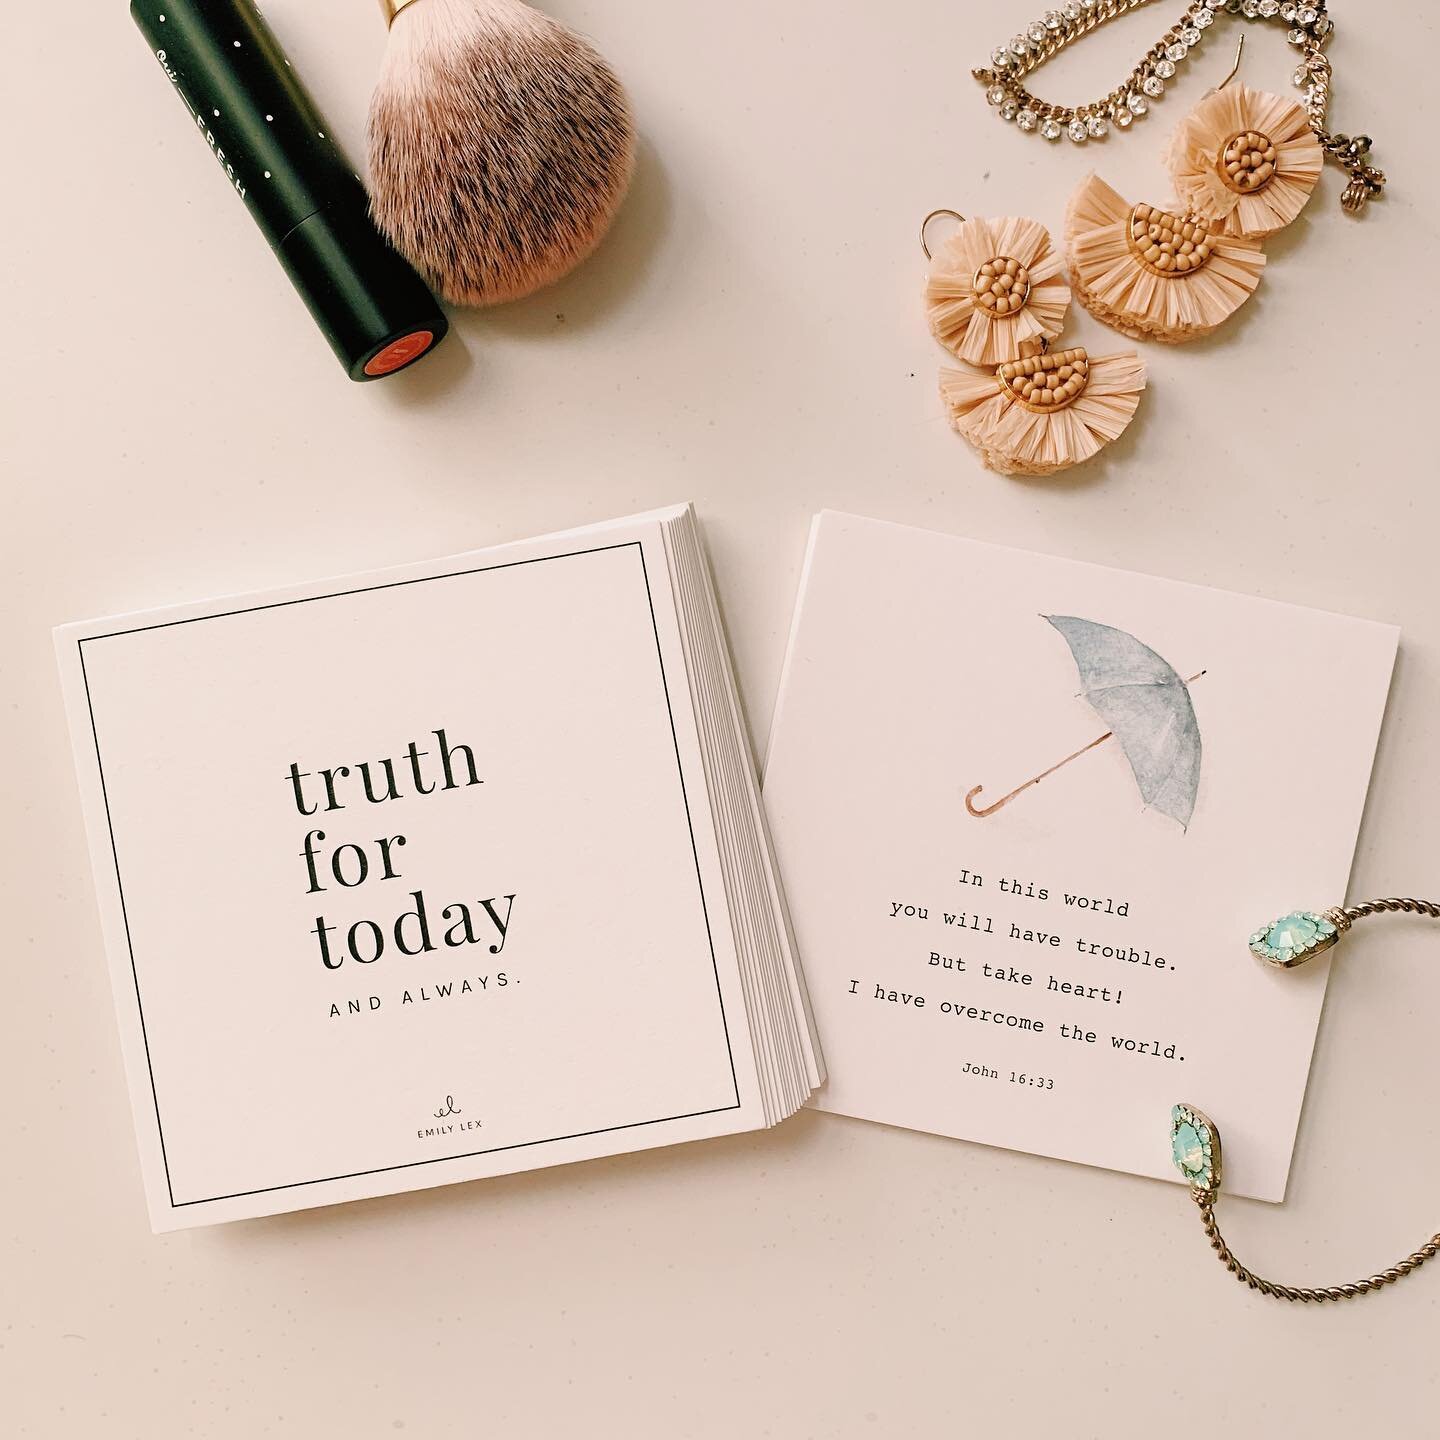 My favorite verse beautifully depicted by @emilylexstudio. My sweet father-in-law gifted me this Truth for Today card set for Christmas and I&rsquo;ve been using them for scripture memory. I think they&rsquo;d make a great Valentine&rsquo;s gift (or 